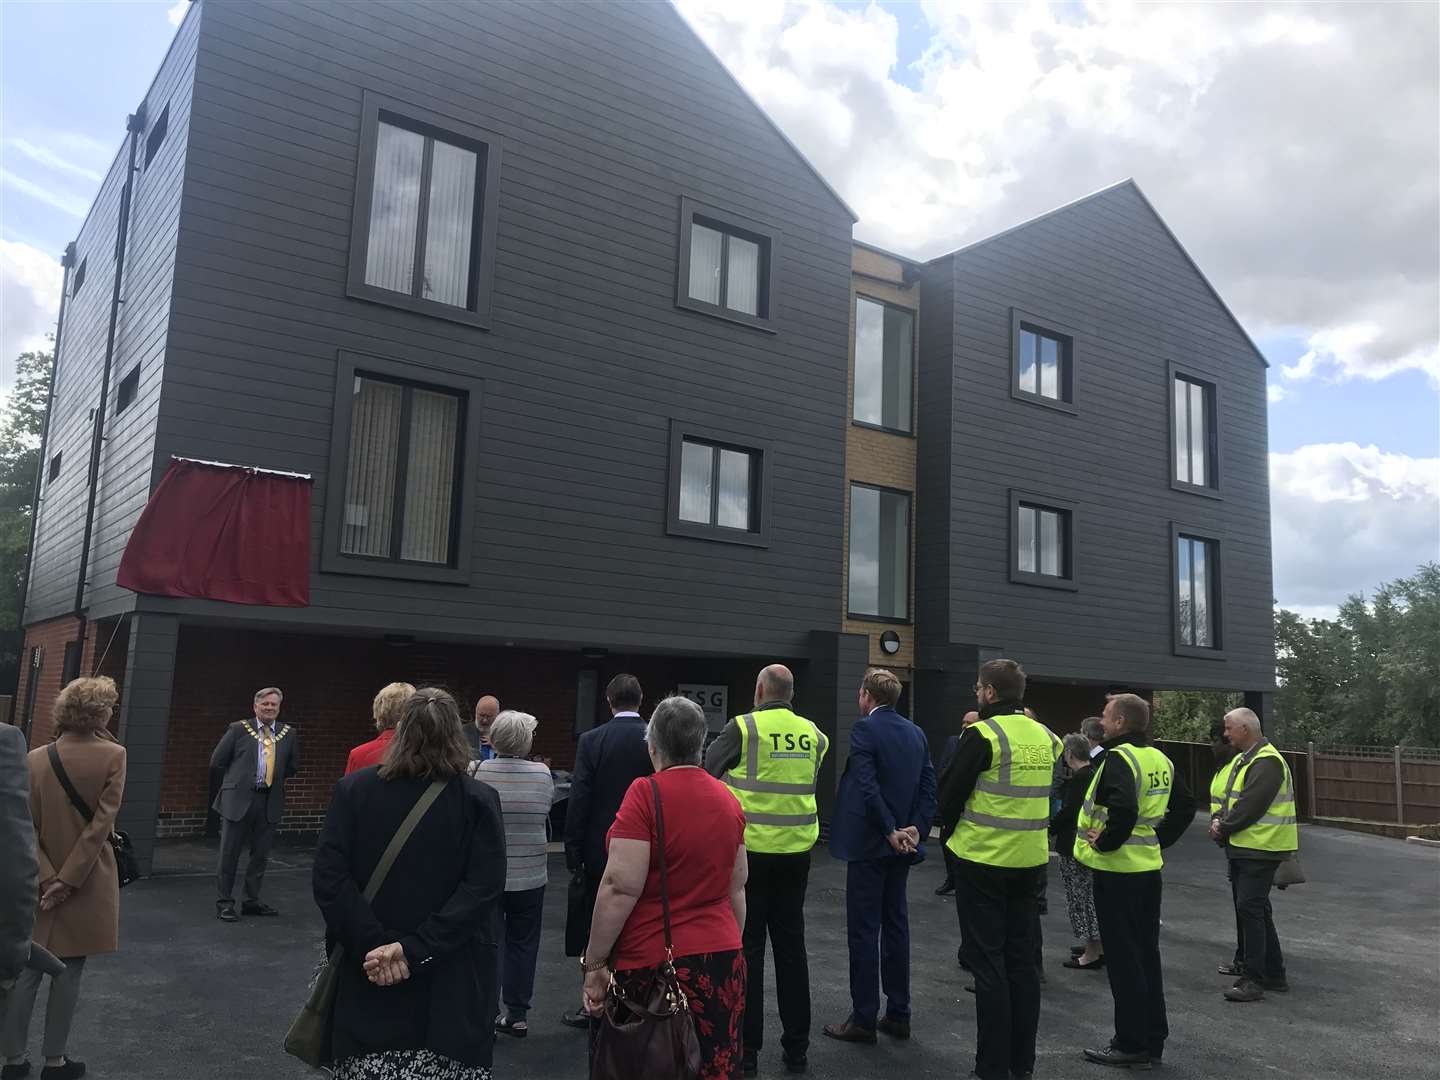 New apartments in Swanscombe have been named after Dartford council director Sheri Green